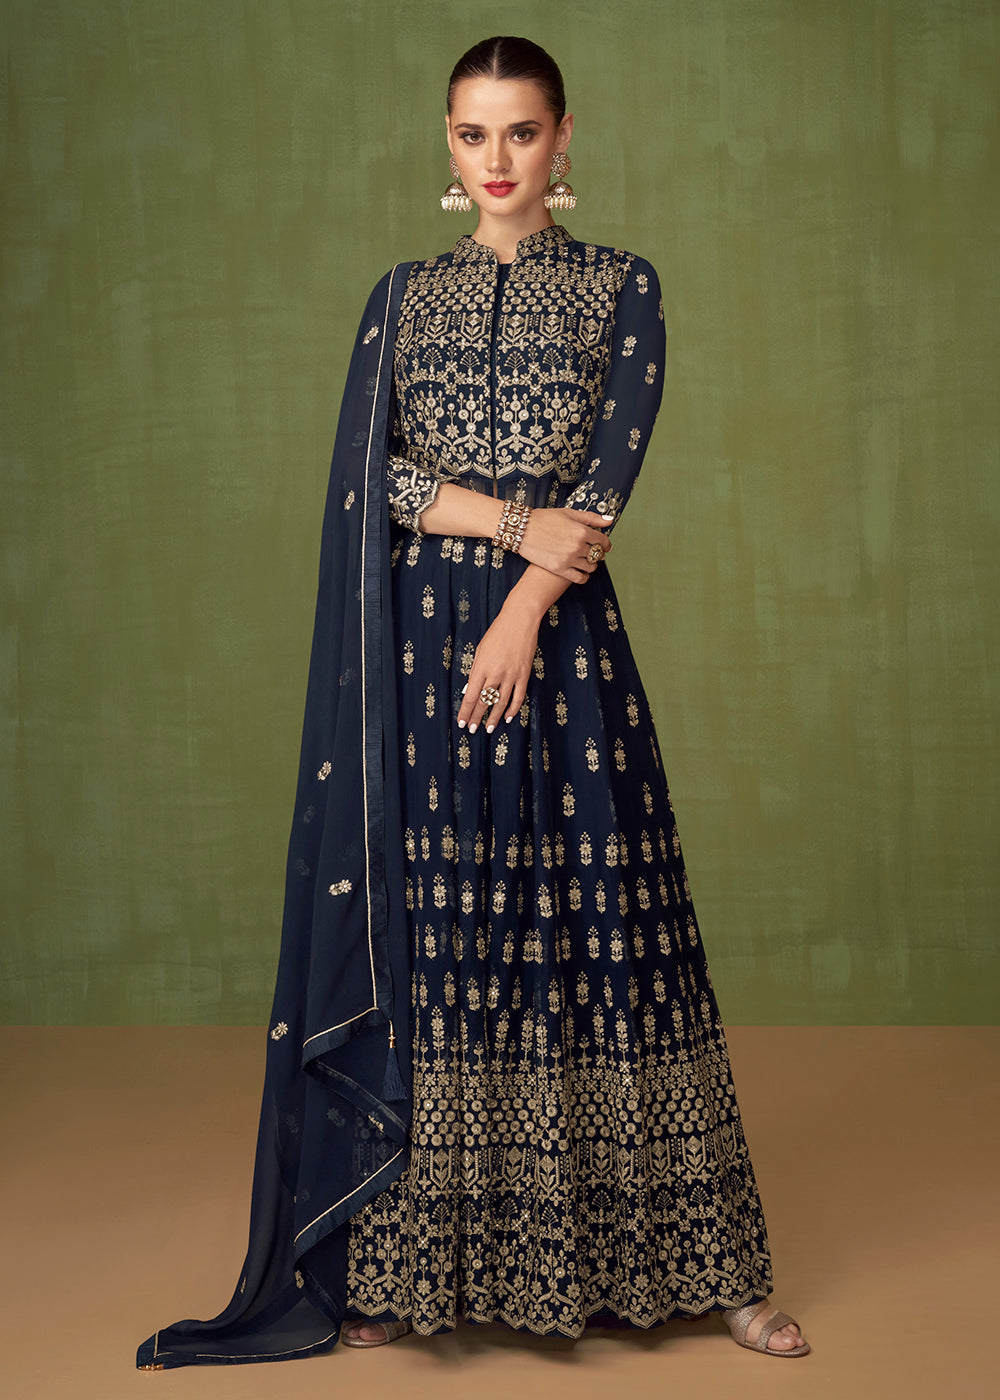 Buy Now Fetching Navy Blue Georgette Wedding Party Anarkali Suit Online in USA, UK, Australia, New Zealand, Canada & Worldwide at Empress Clothing. 